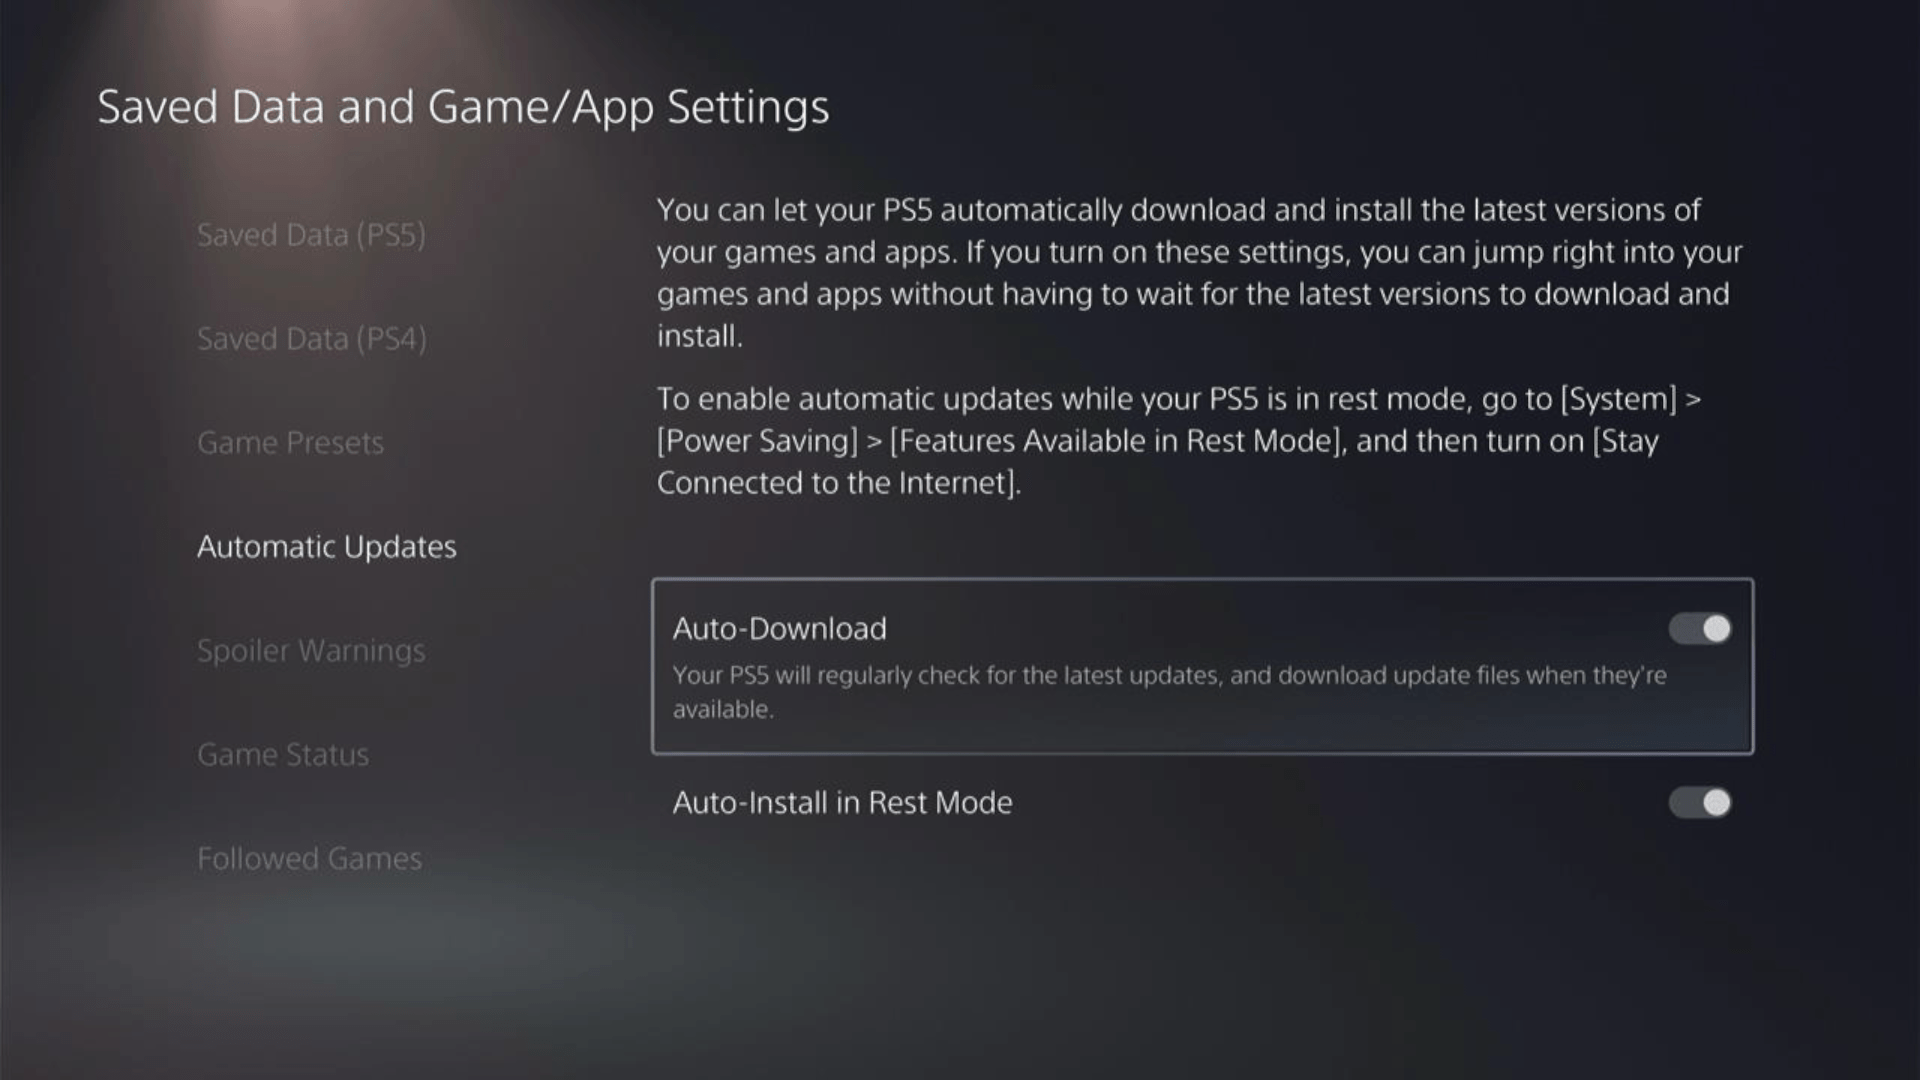 In the Saved Data and Game/App Settings window, select Automatic Updates from the left sidebar to enable automatic game updates to avoid coop not working